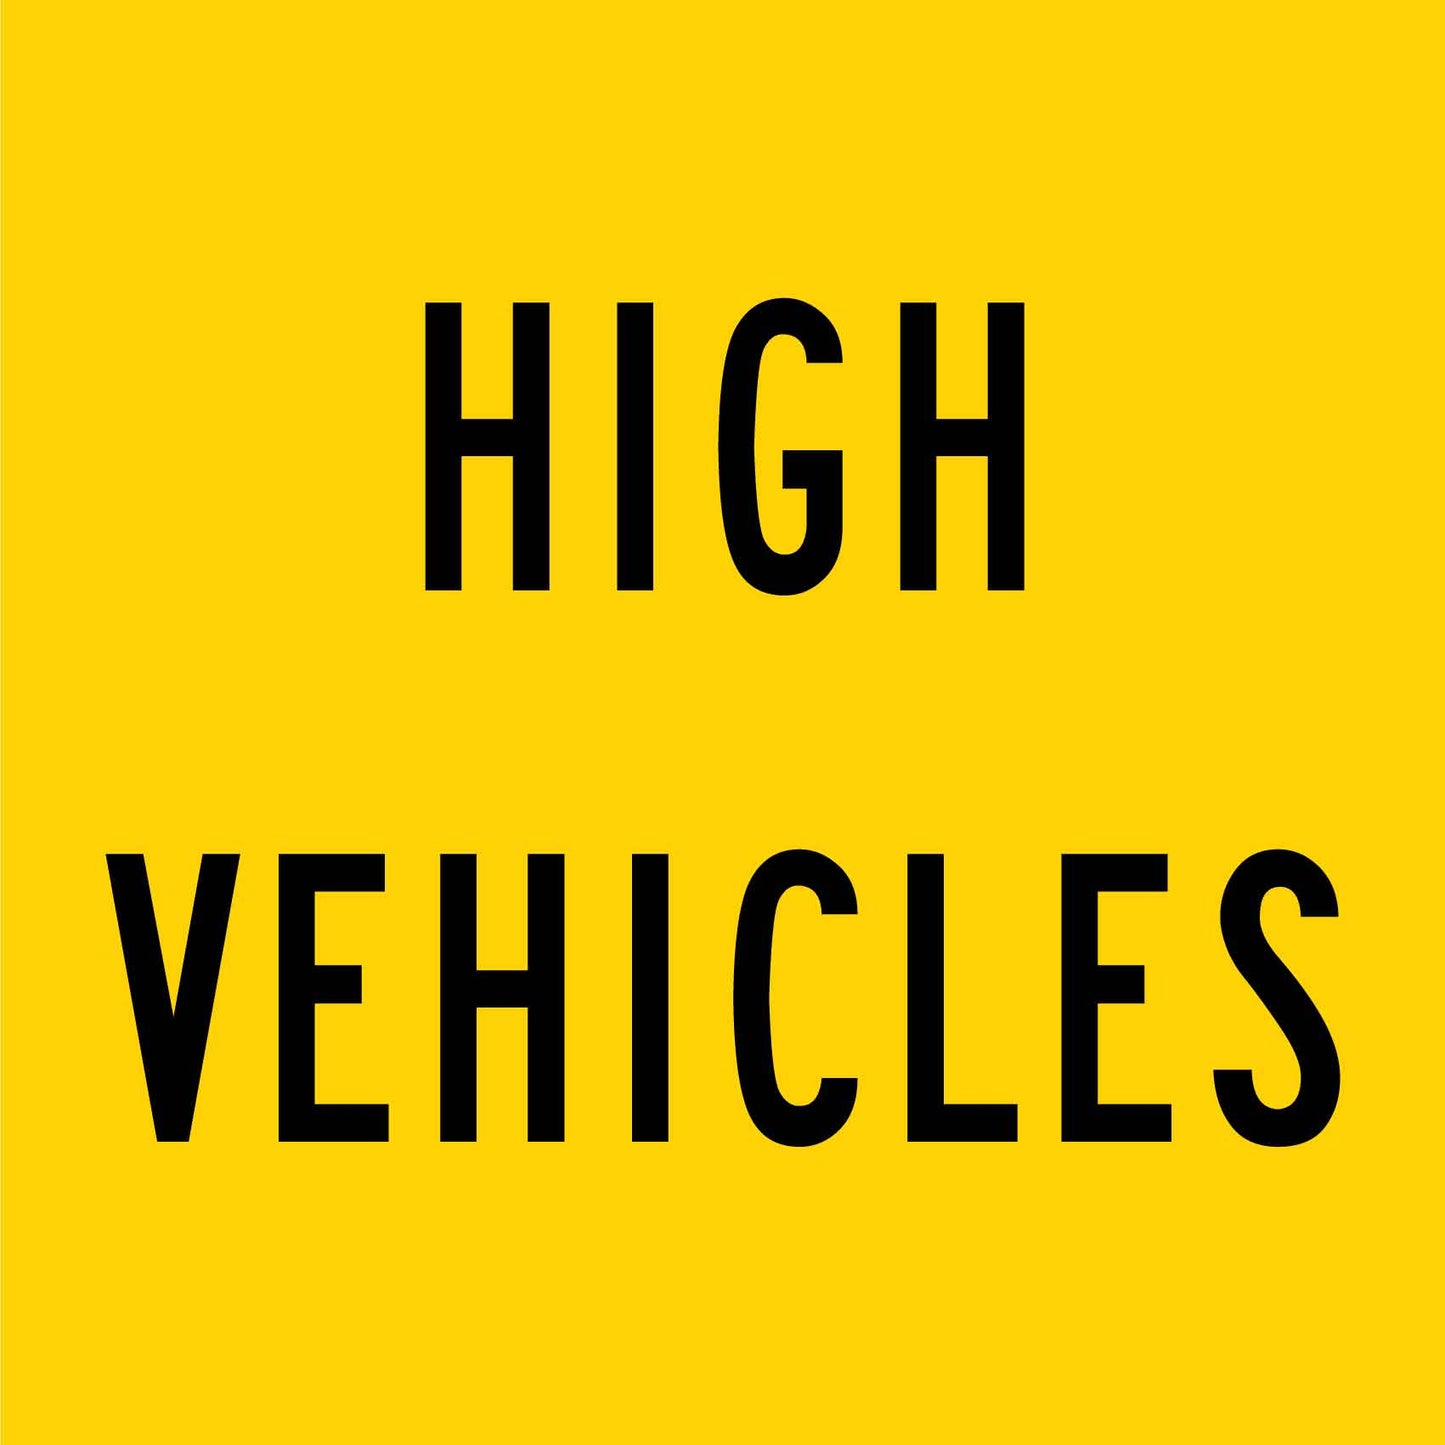 High Vehicles Multi Message Reflective Traffic Sign